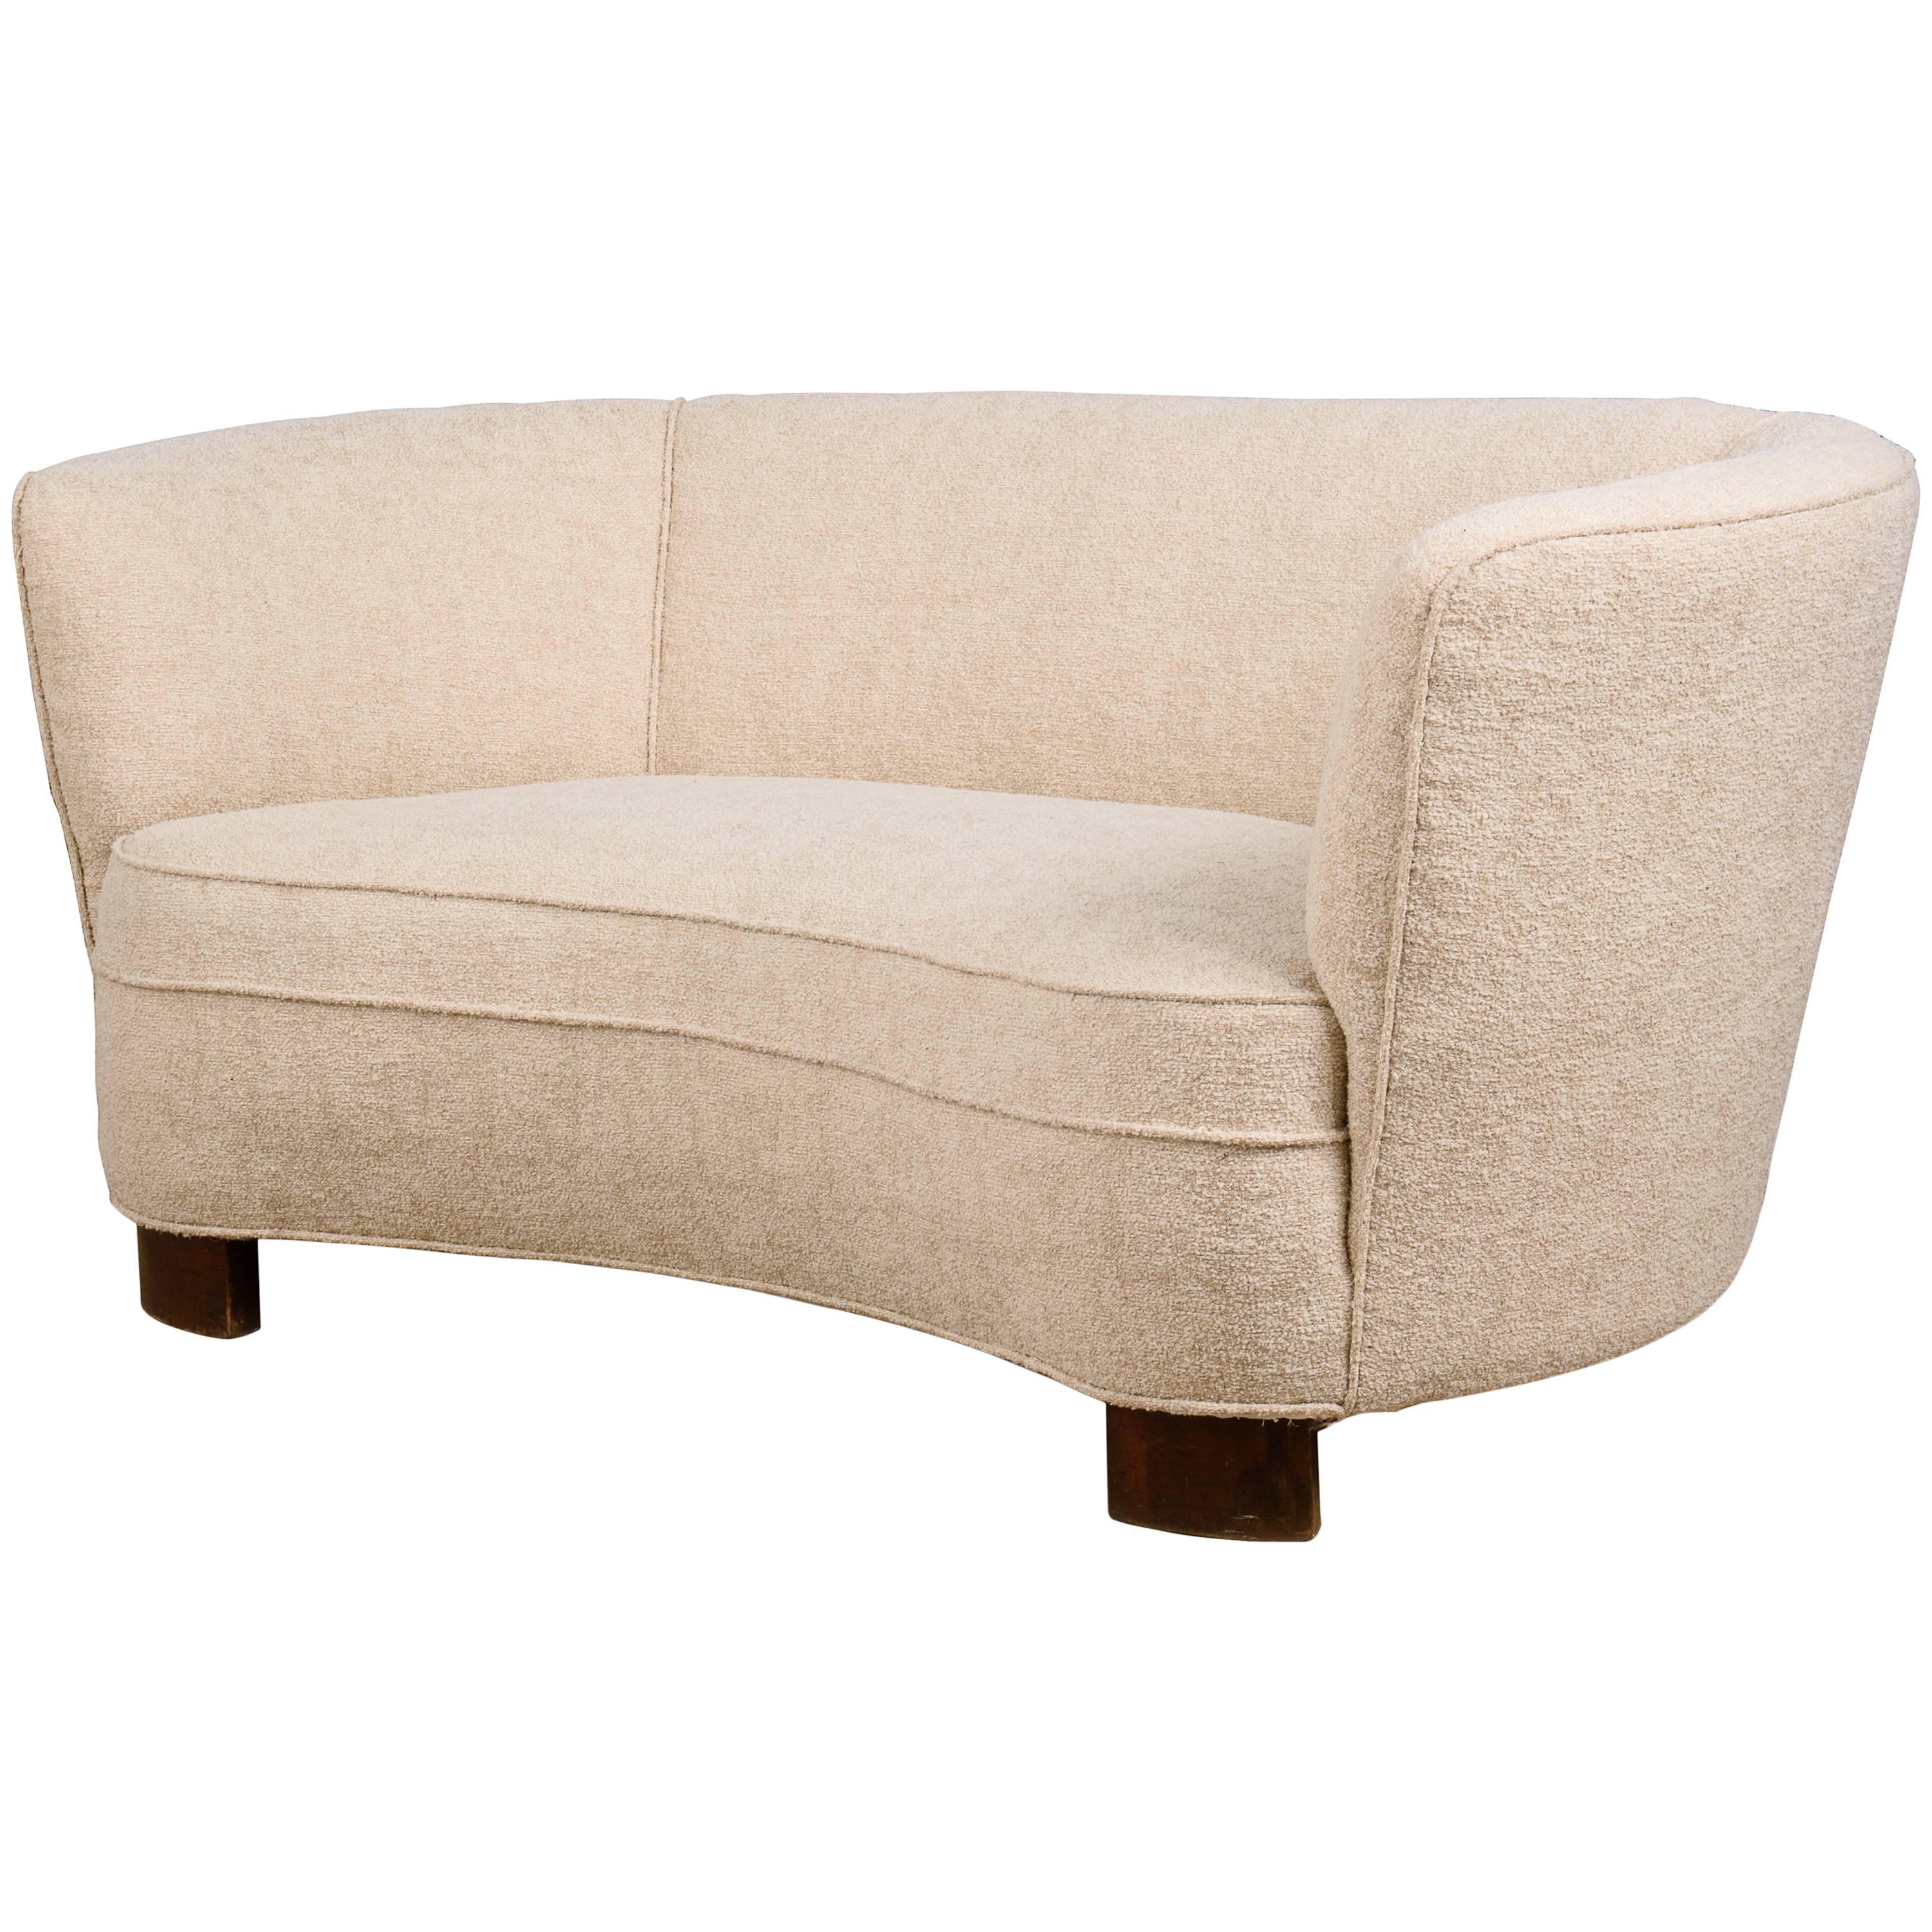 Elegant Curved Sofa by Andreas Jeppe Iversen, DK